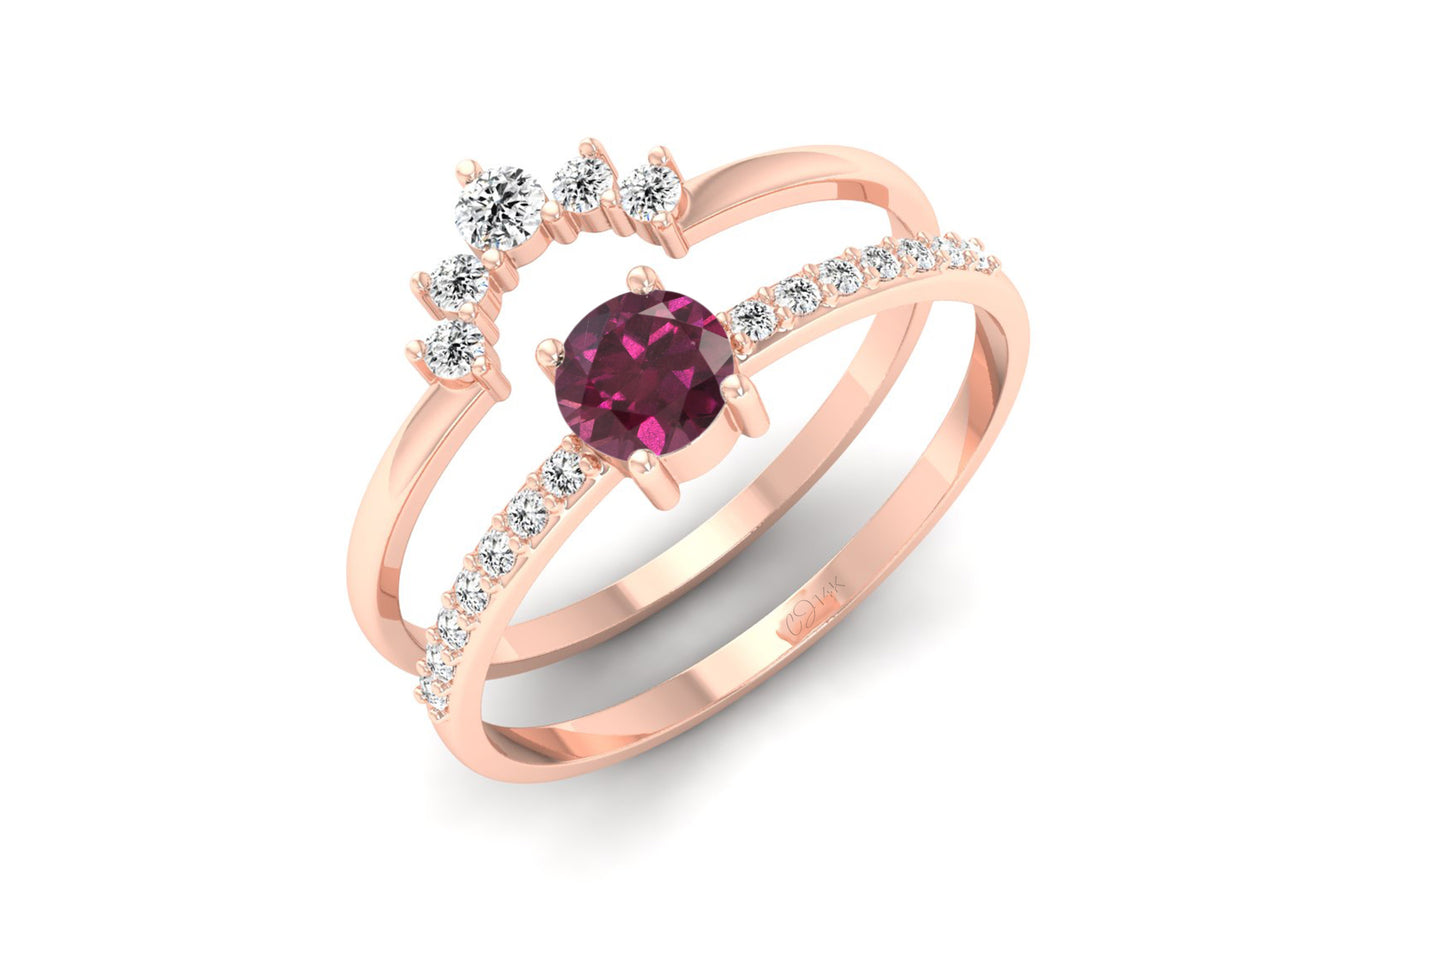 Load image into Gallery viewer, Round 4mm Cut January Birthstone Genuine Rhodolite Garnet Stackable Ring 14k Solid Gold 0.20 Ct White Diamond Fine Jewelry For Anniversary Gift
